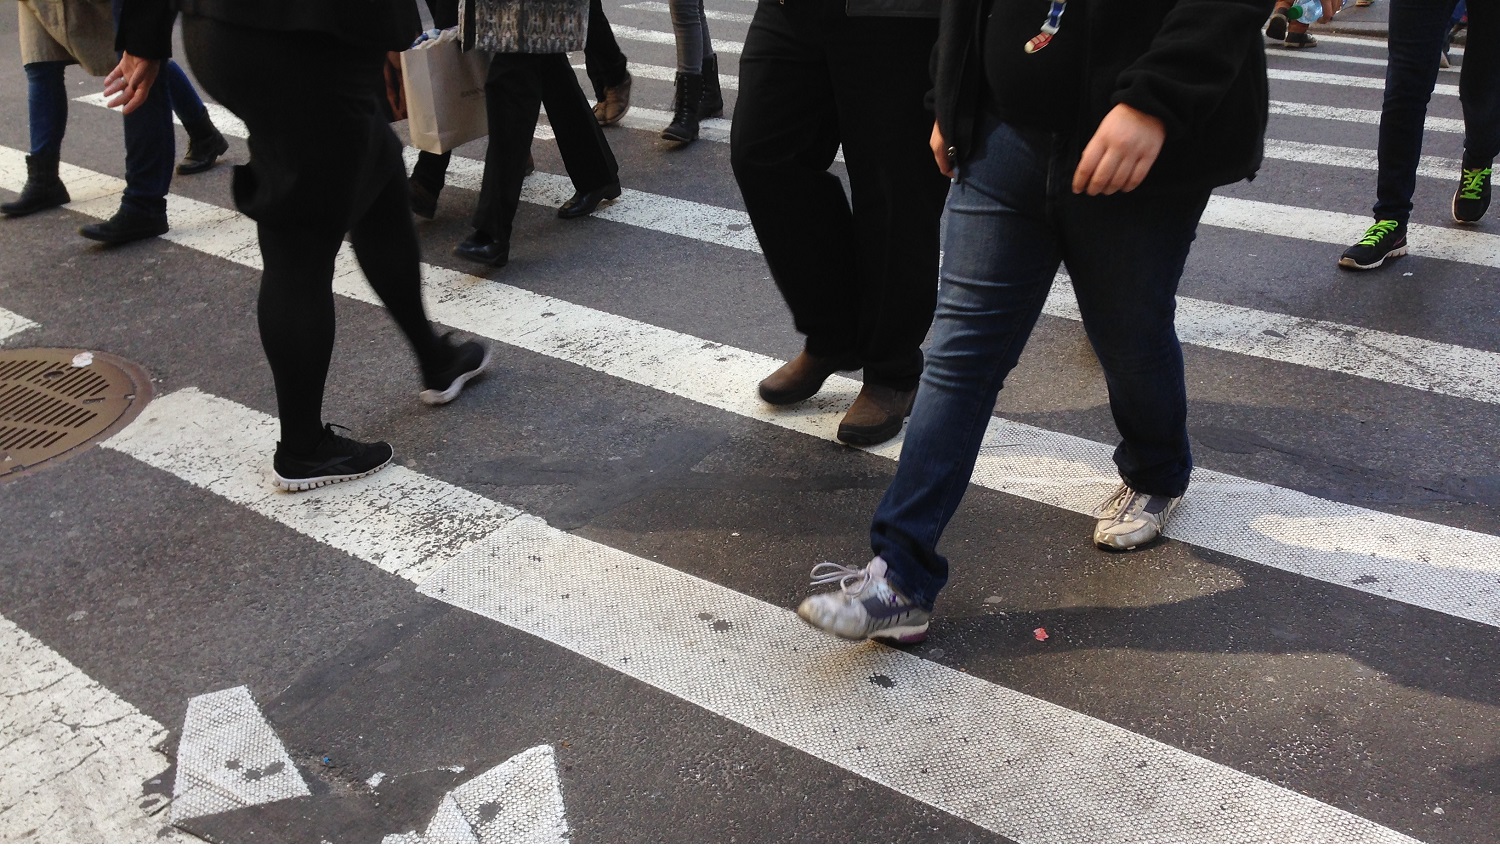 Pedestrians crossing city sidewalk - October Seminar to Focus on Pedestrian Commuting in the Urban Environment - Parks Recreation and Tourism Management